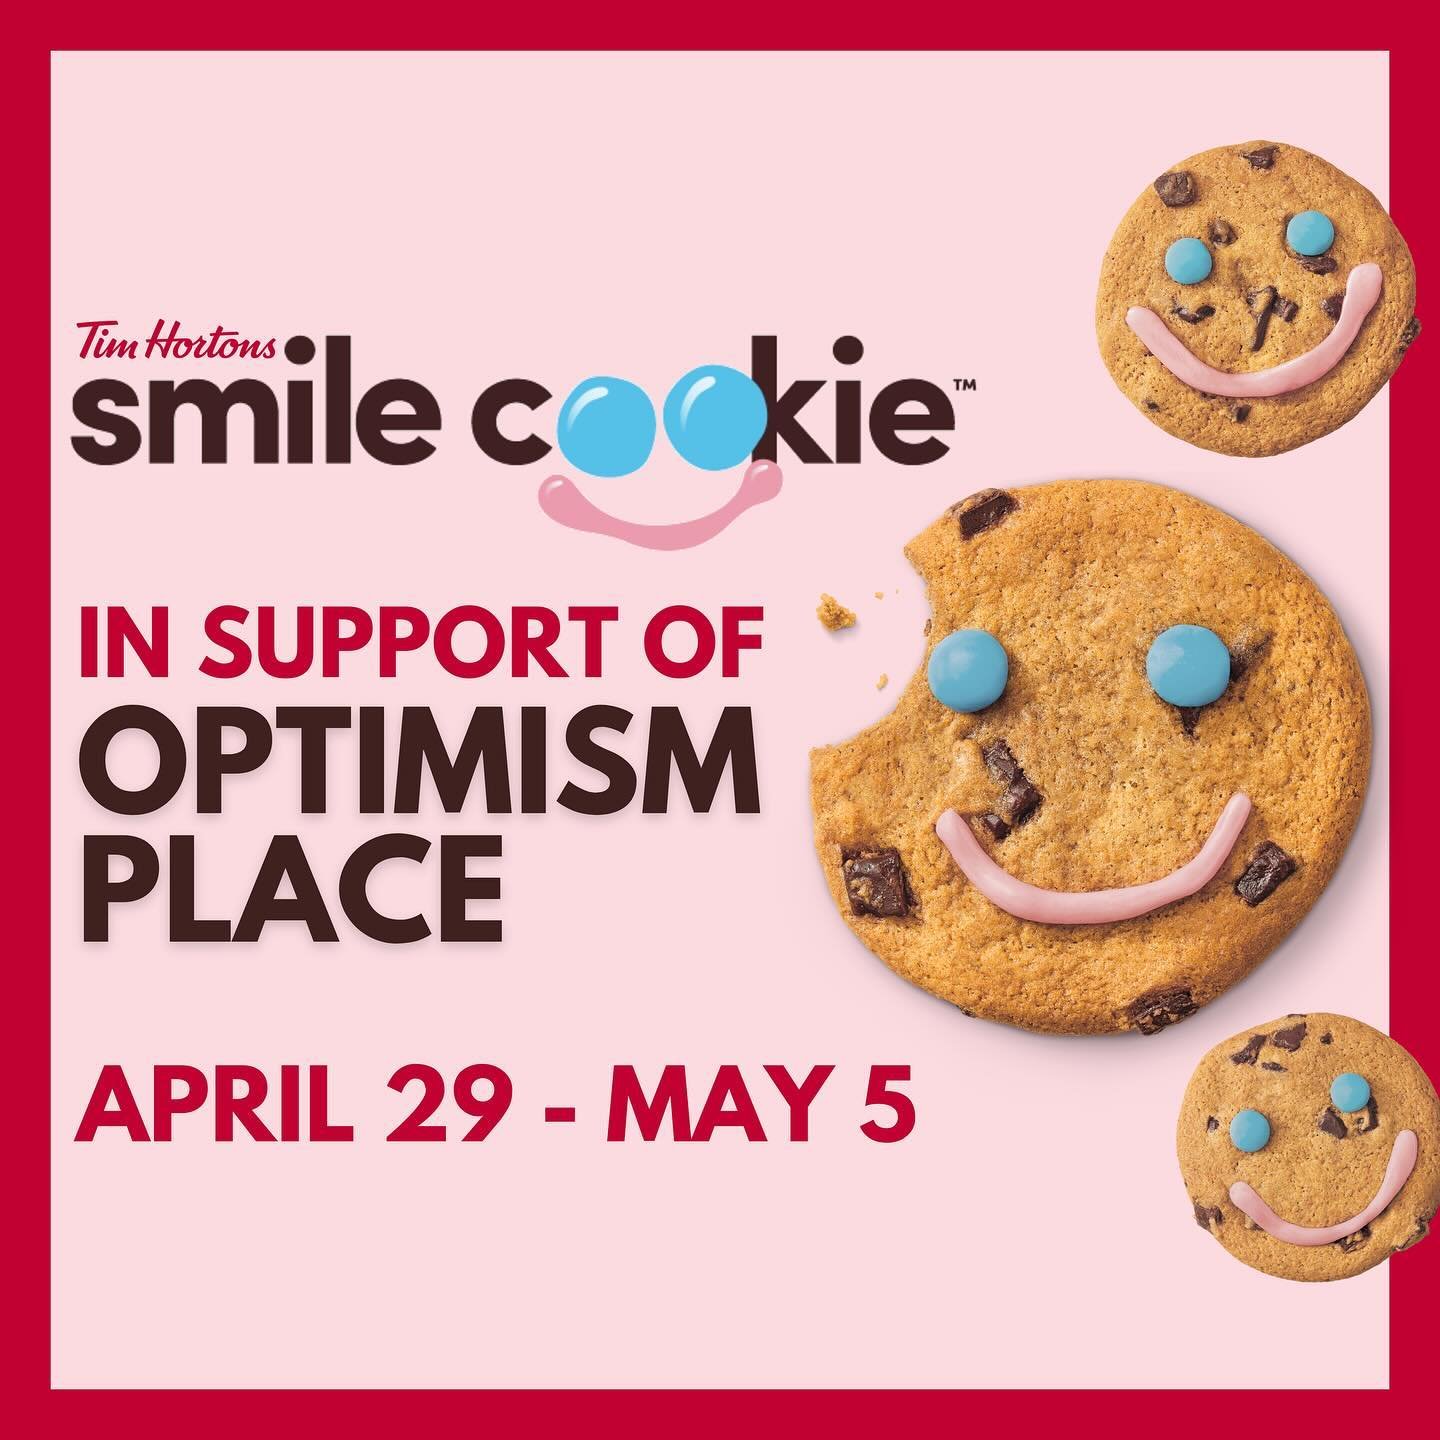 We are so excited to be chosen as the 2024 Smile Cookie Charity this year! 🍪❤️

To avoid disappointment, we encourage pre-ordering cookies - you can find the PDF at the link in our bio ➡️

Smile Cookies for Optimism Place will be available at all th